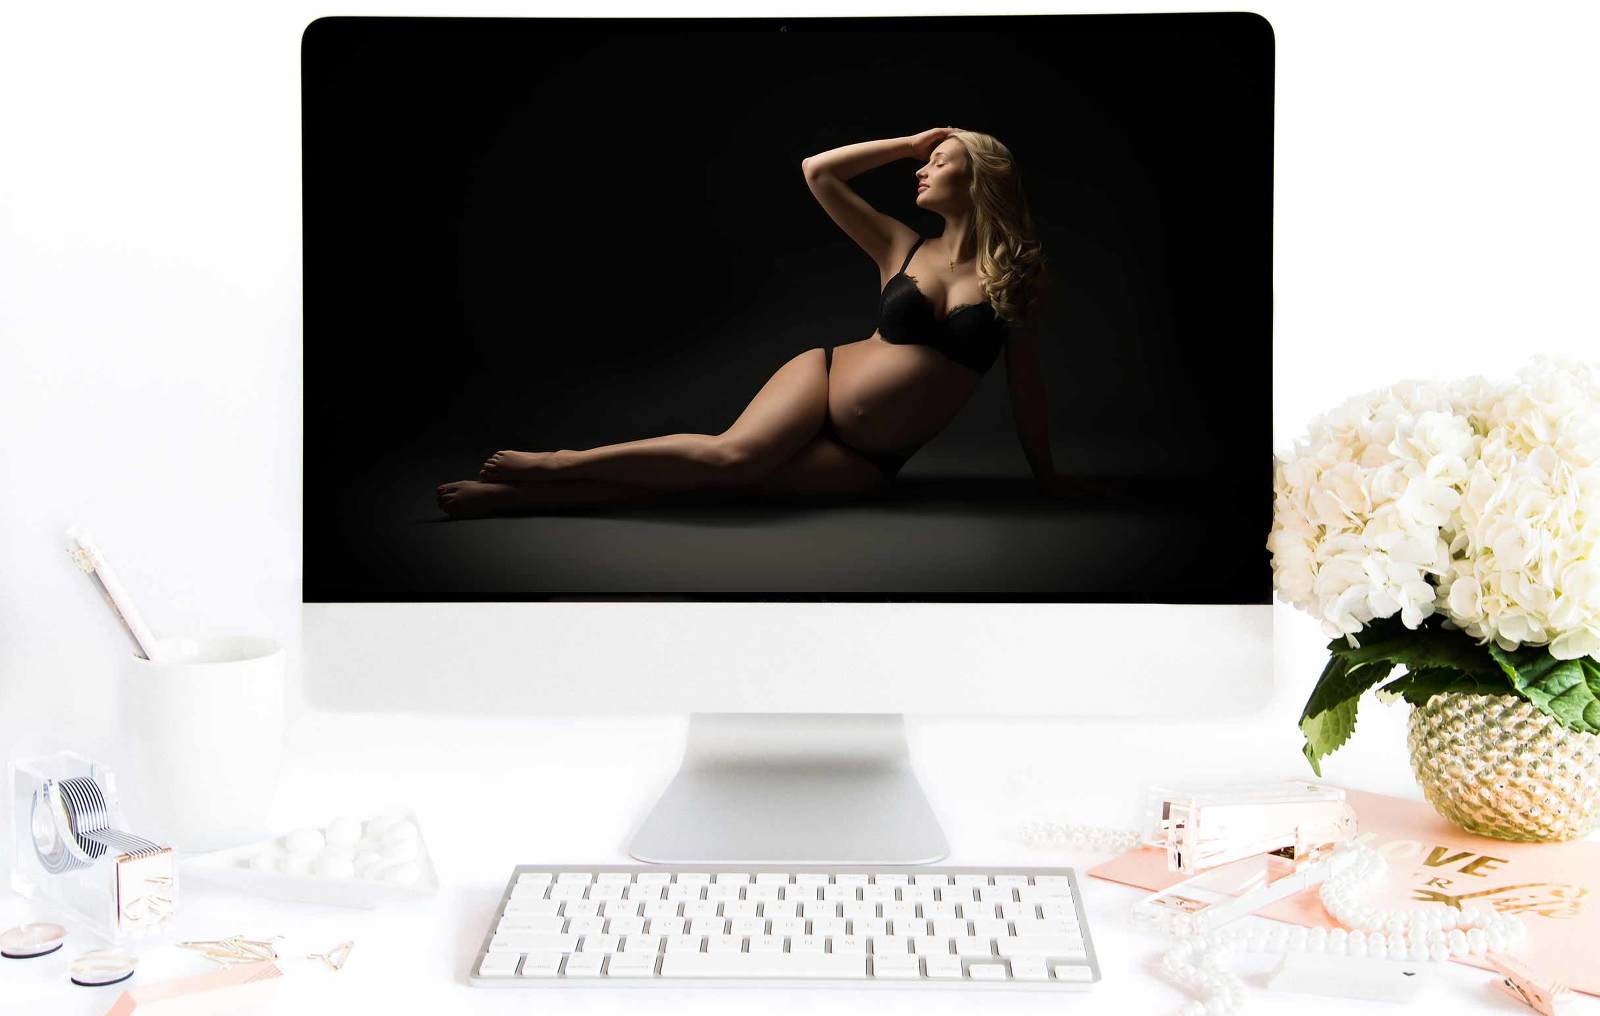 Computer screen showing a maternity photo of a pregnant woman laying on the floor